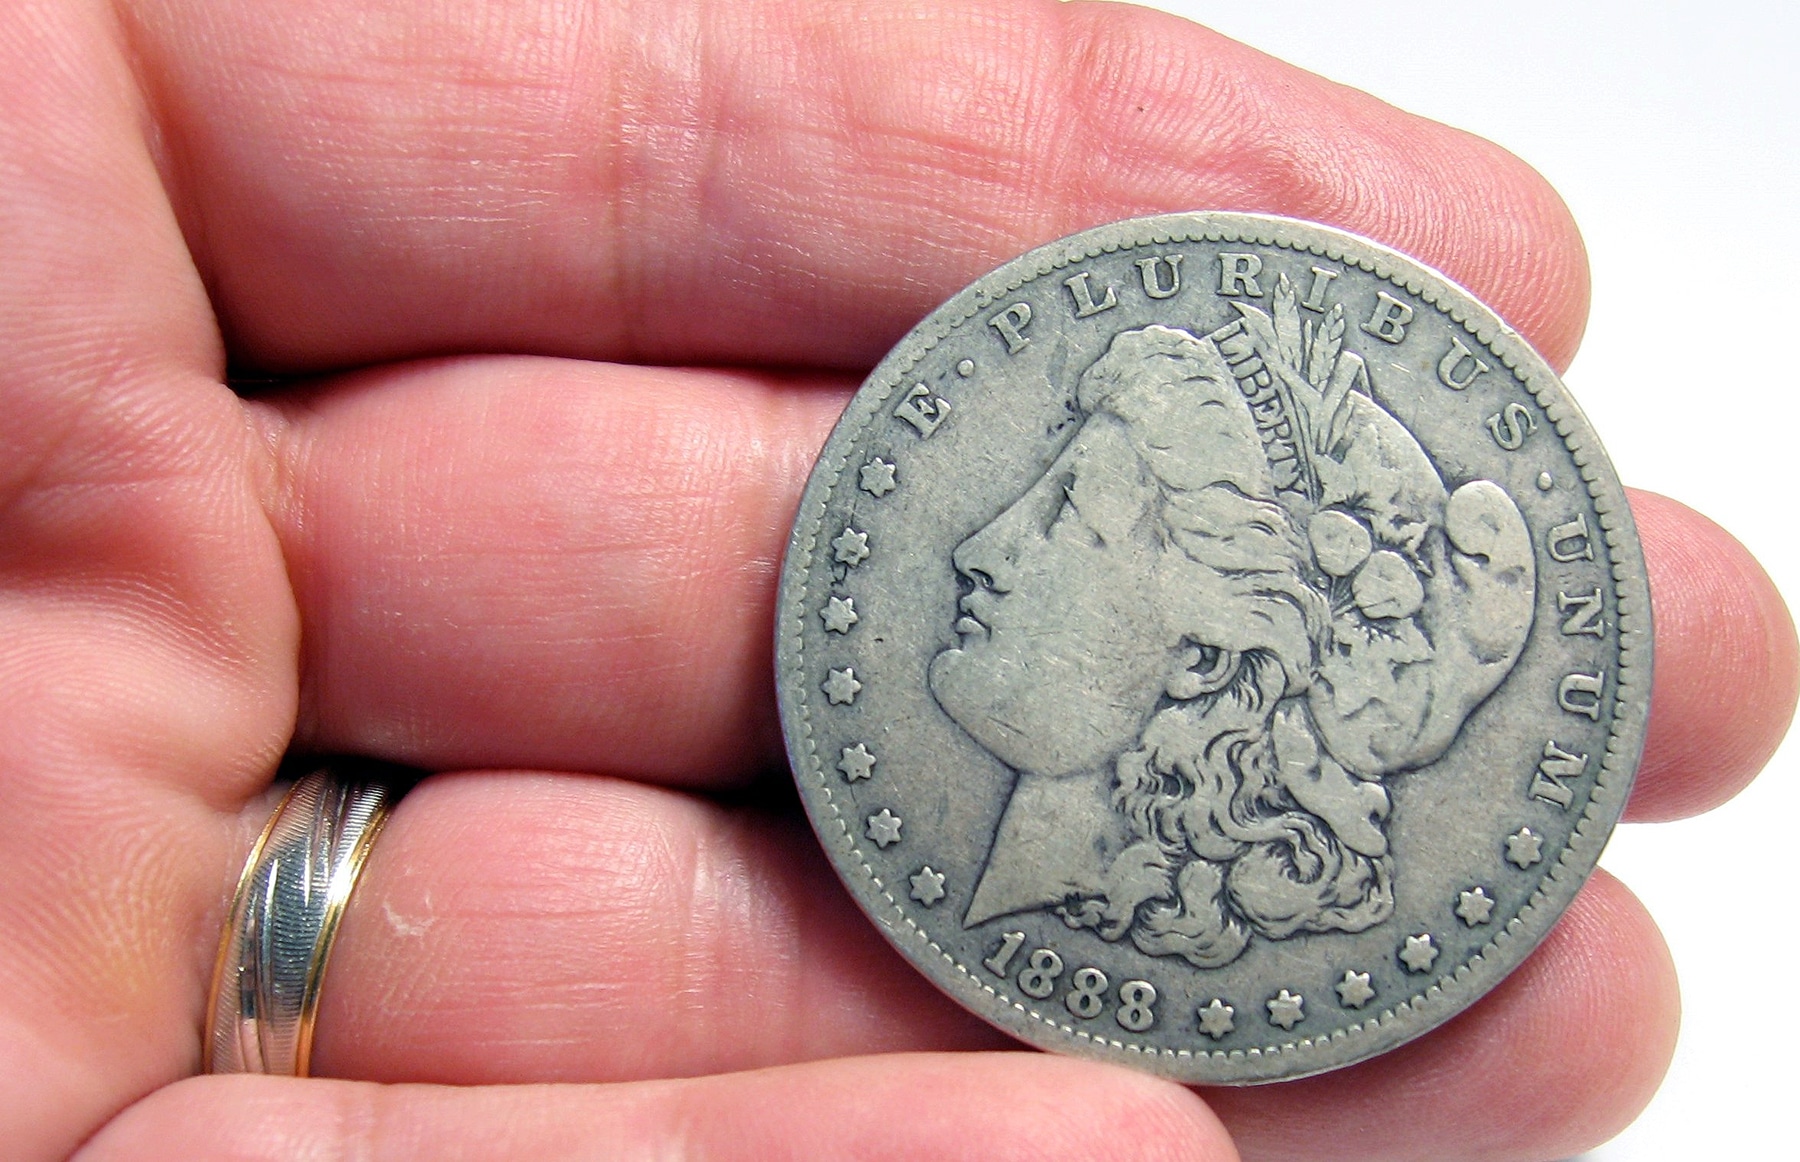 Photo of a man holding an old silver liberty dollar on his fingertips.